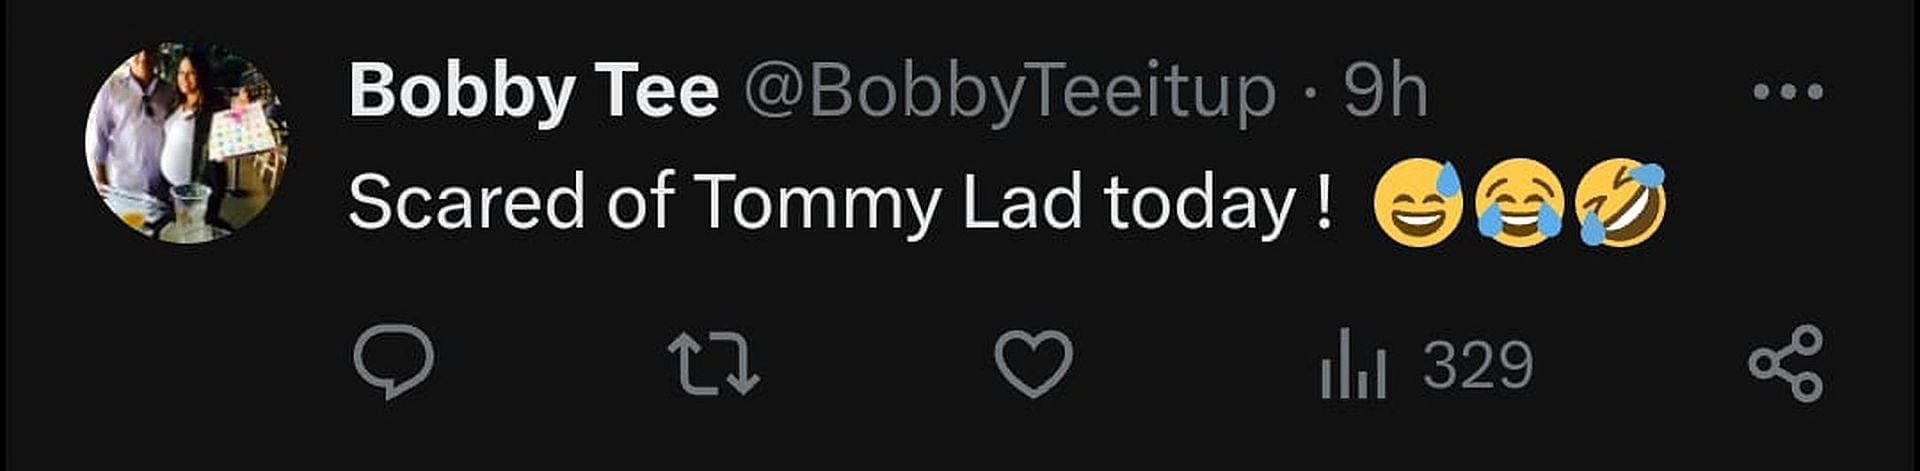 Fan&#039;s reaction to Tommy Fleetwood meeting Rory McIlroy&#039;s daughter. (Image via X)